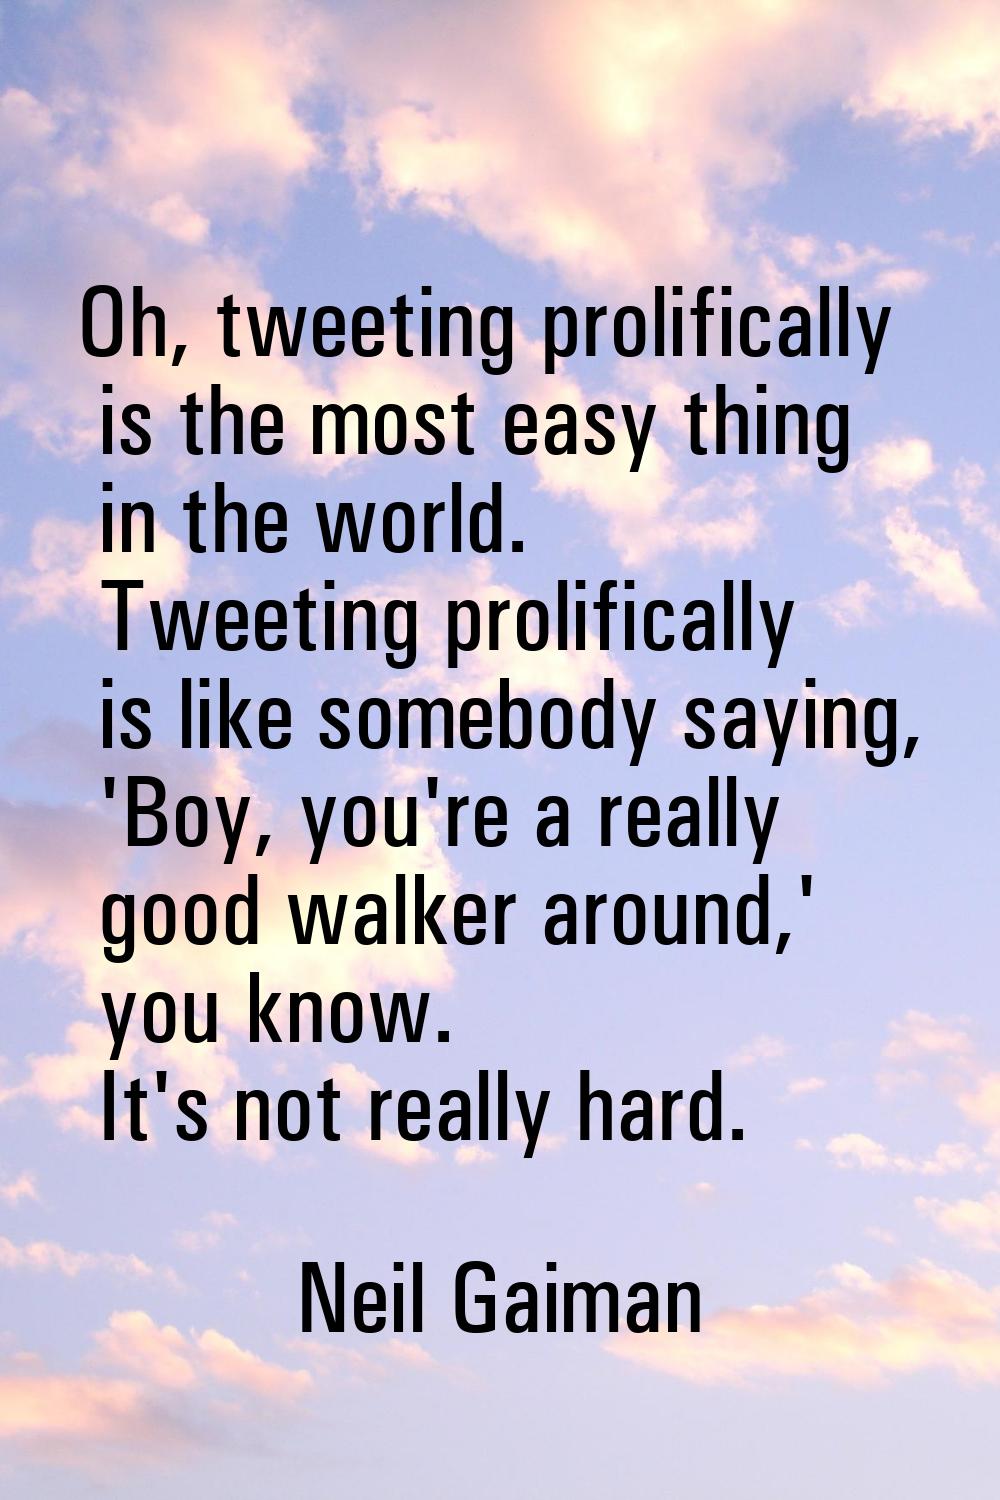 Oh, tweeting prolifically is the most easy thing in the world. Tweeting prolifically is like somebo